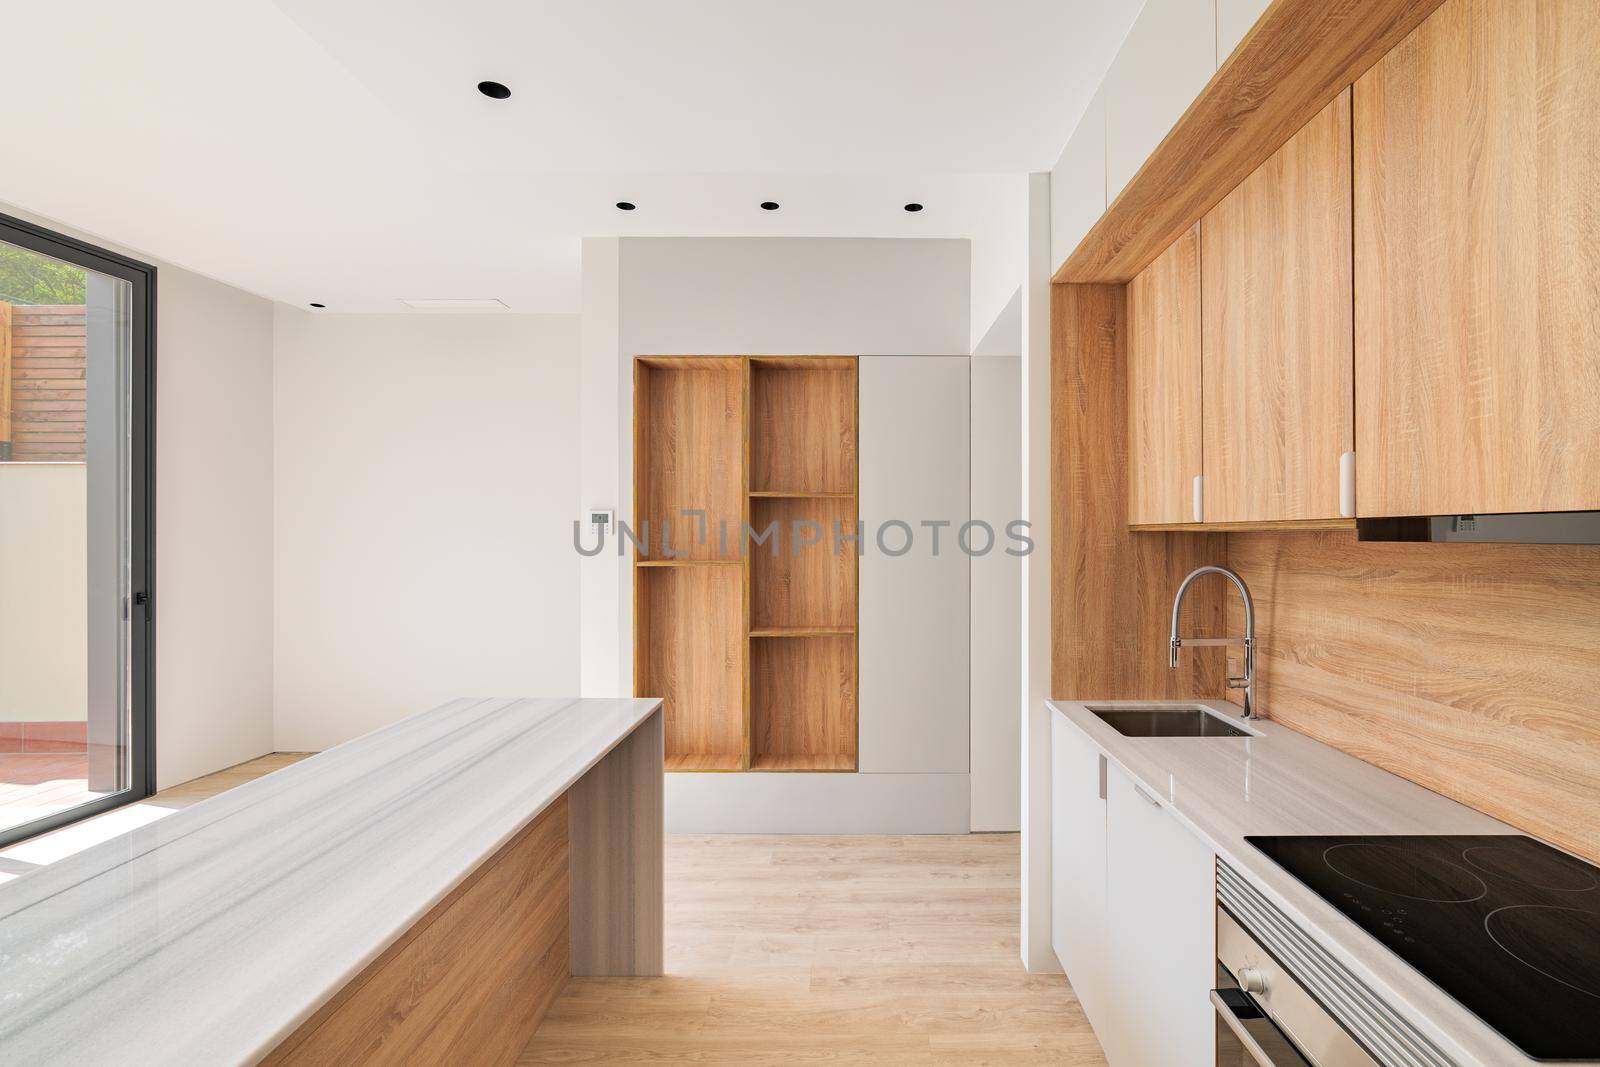 Modern kitchen interior with island and wooden furniture. Empty interior of bright refurbished apartment